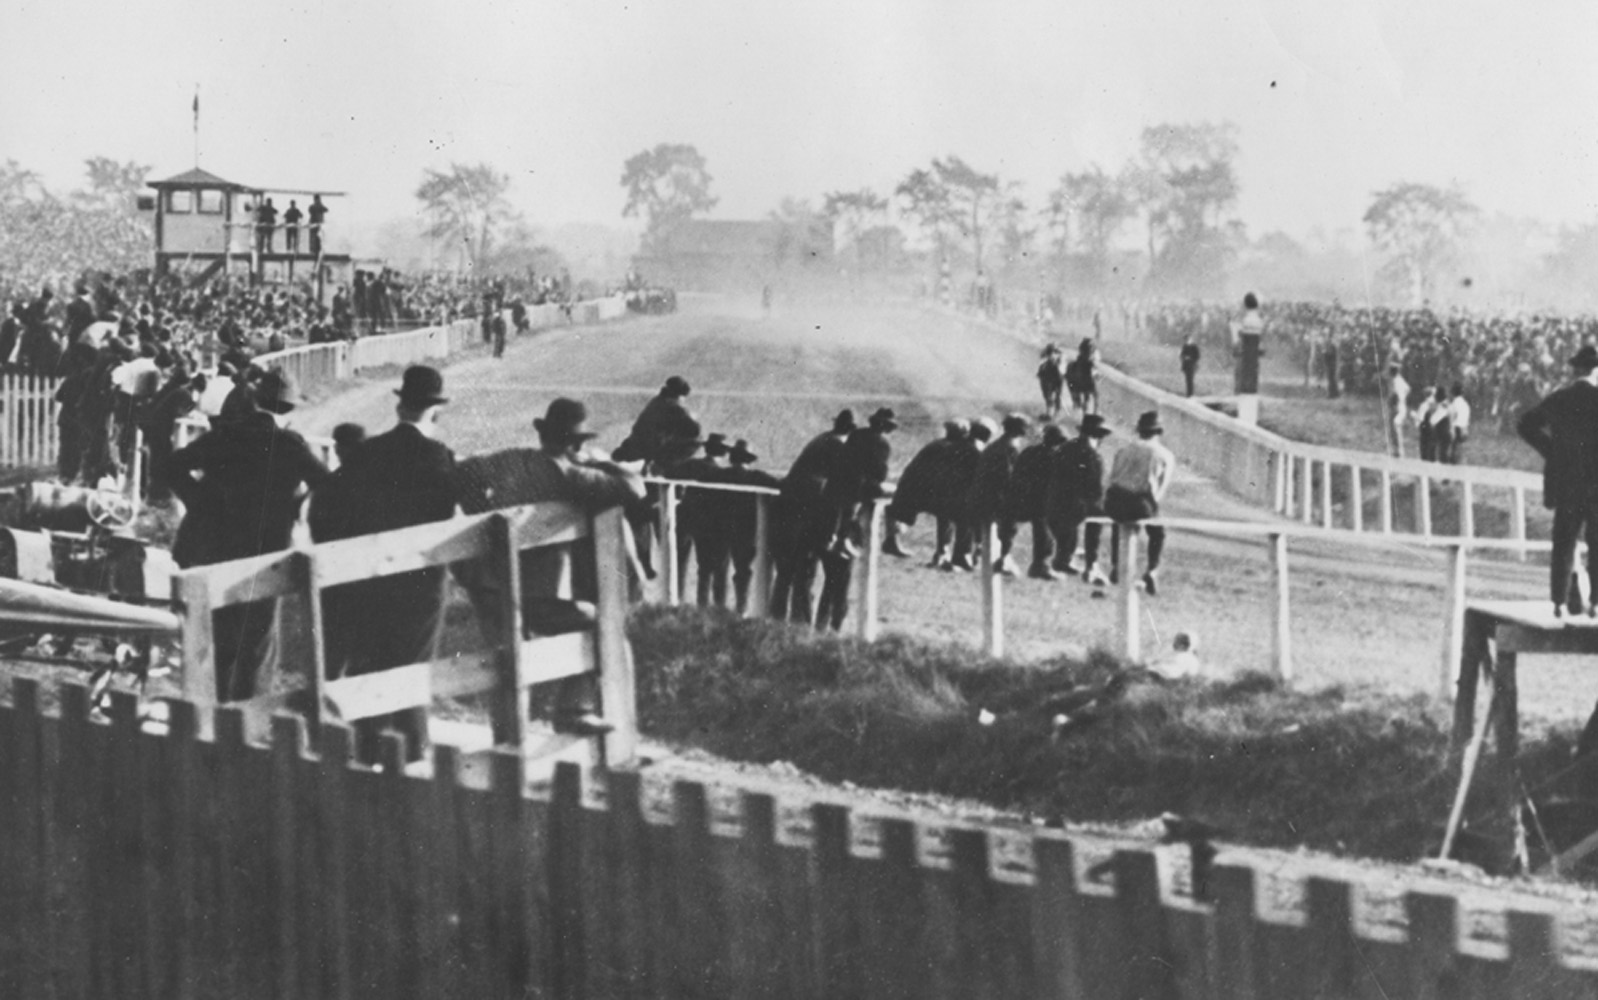 Man o' War duels Sir Barton in the Kenilworth Gold Cup match race on Oct. 12, 1920 in Windsor, Ontario (Brown Bros./Museum Collection)